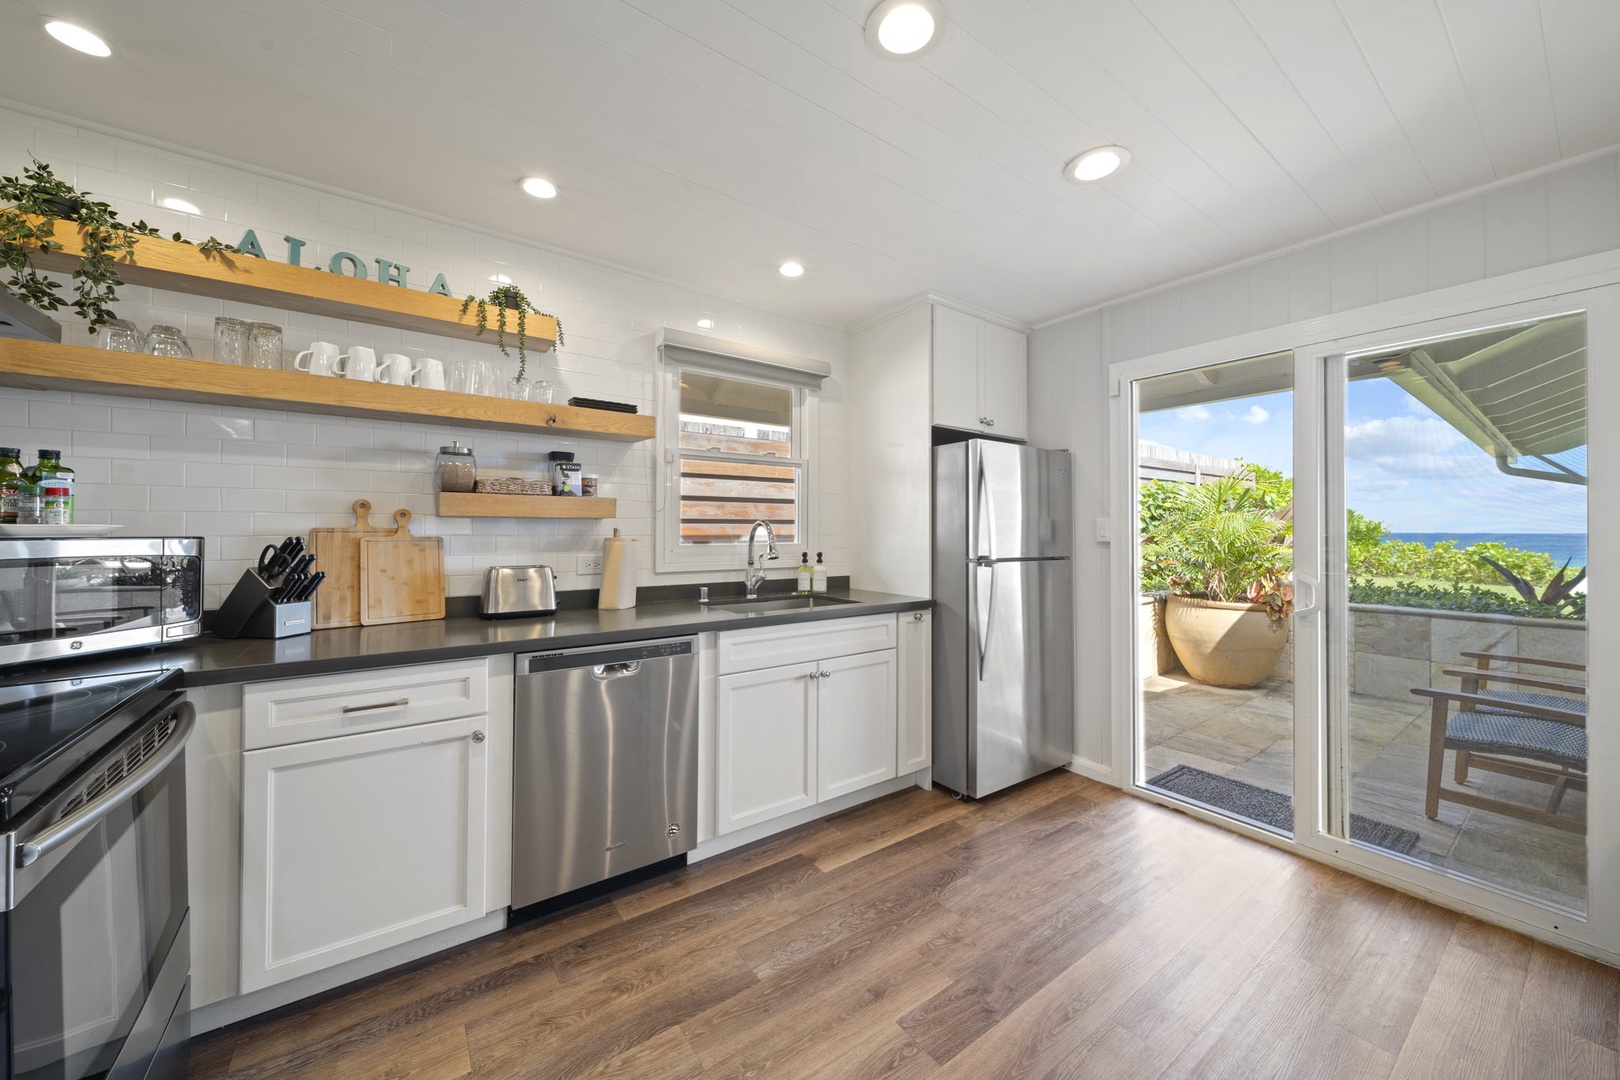 Haleiwa Vacation Rentals, Hale Nalu - The first kitchen has lots of natural light thanks to the sliding glass doors opening to the backyard